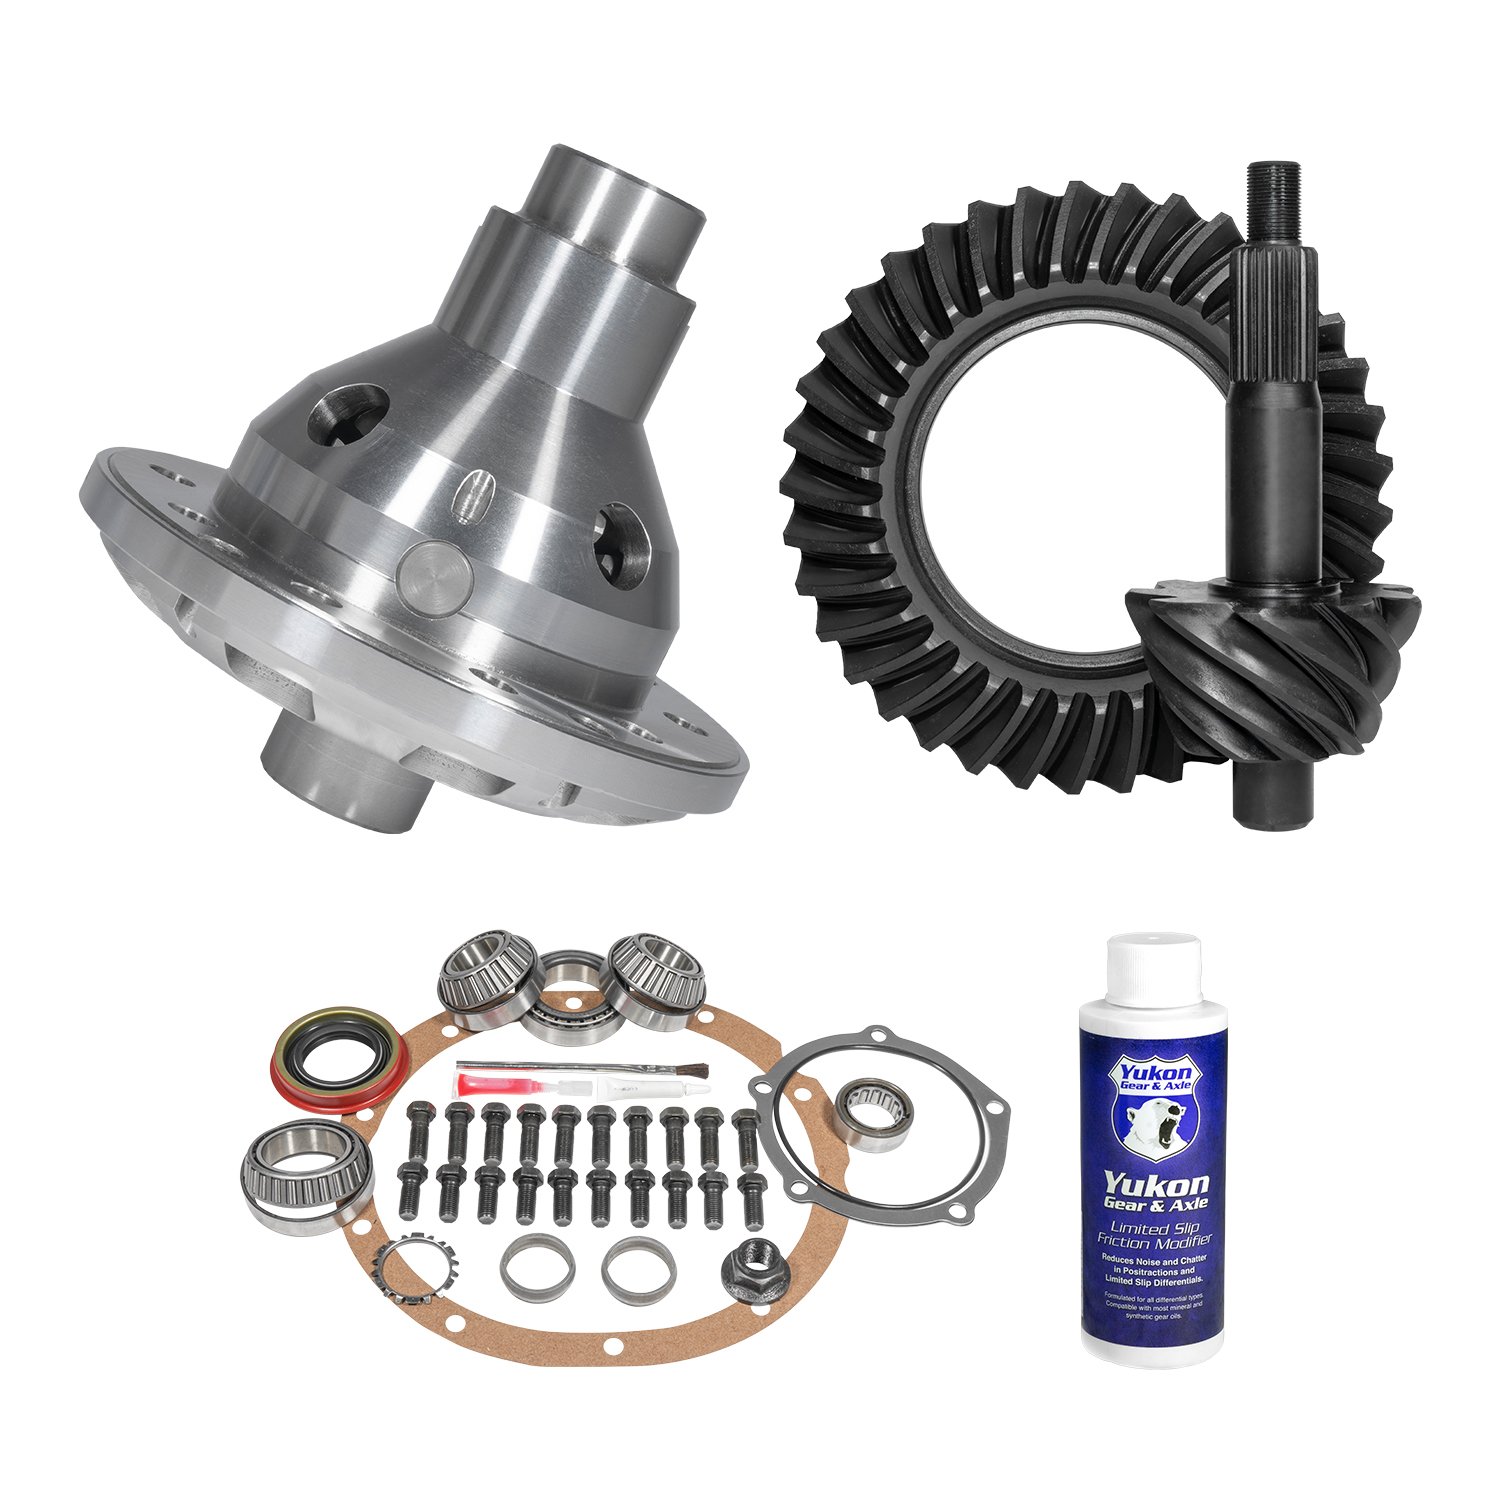 Muscle Car Limited Slip & Re-Gear Kit For Ford 9 in., 28 Spline, 3.70 Ratio